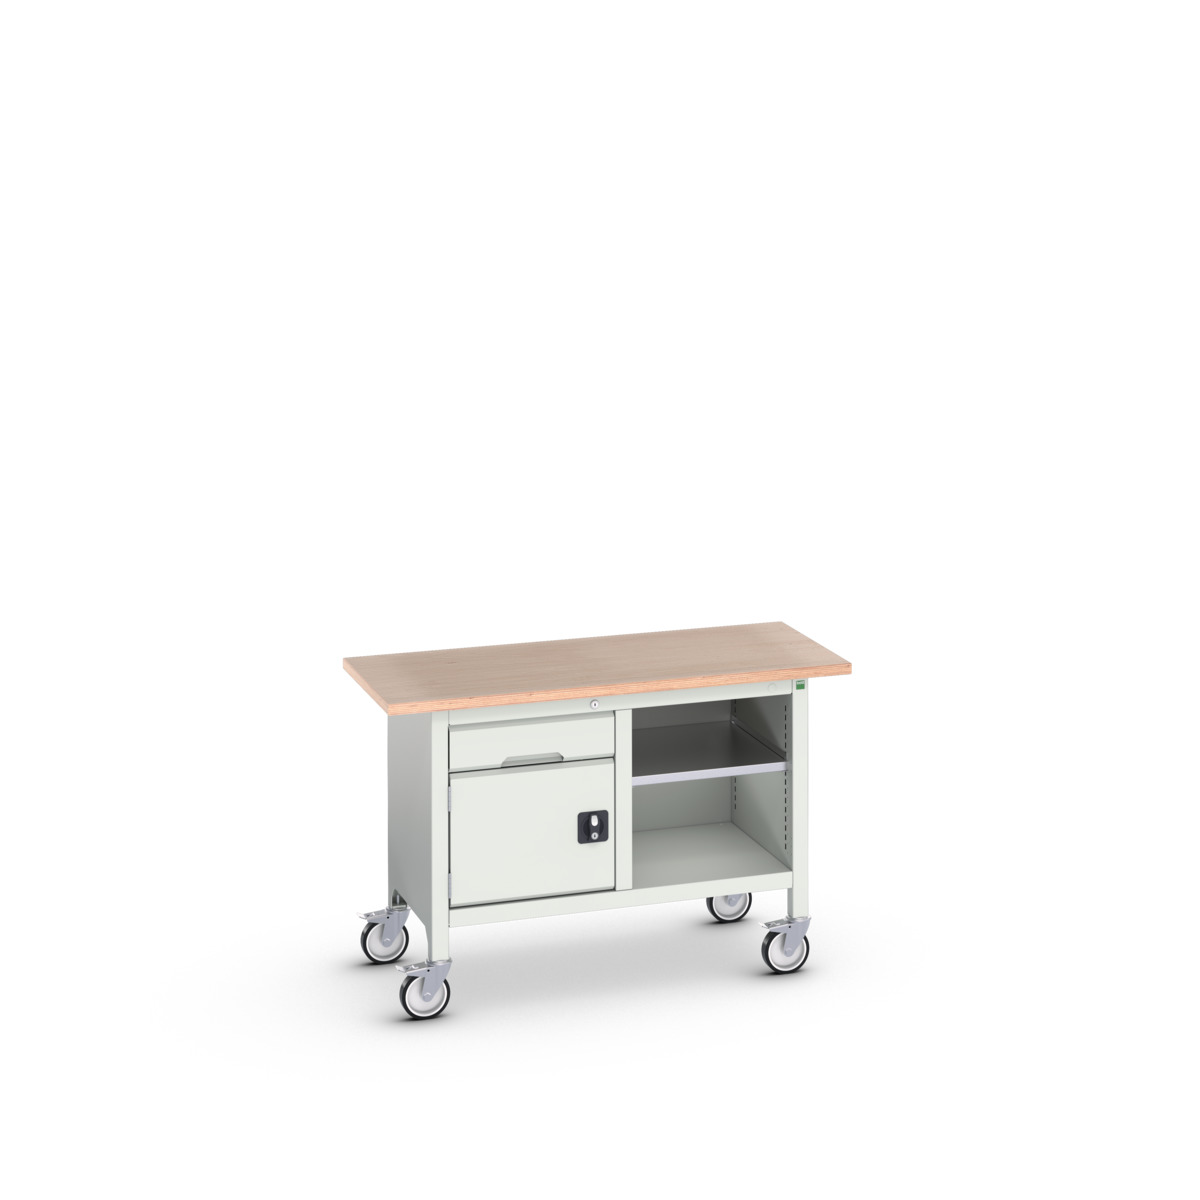 16923200.16 - verso mobile storage bench (mpx)